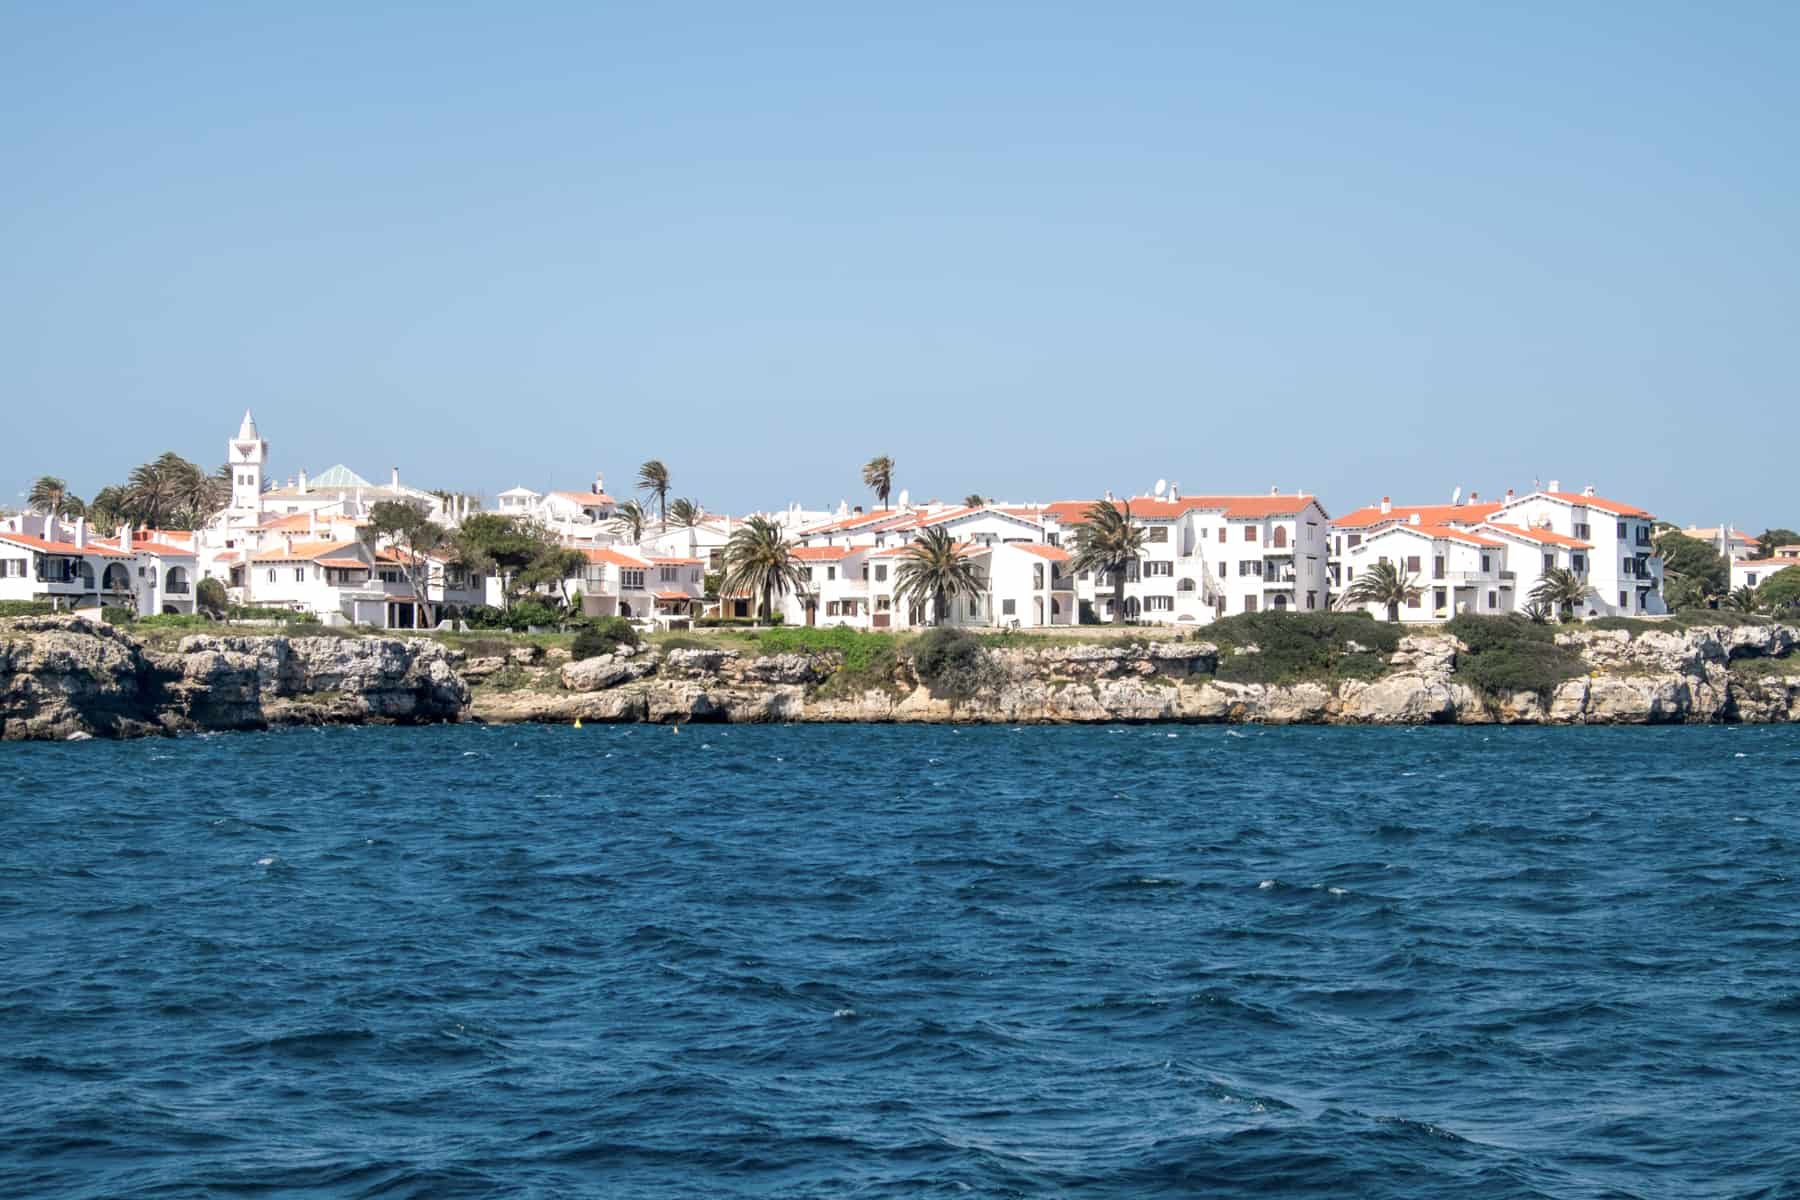 View from a boat on dark blue waters looking towards a rocky coastline filled with luxury white houses with orange rooftops. 